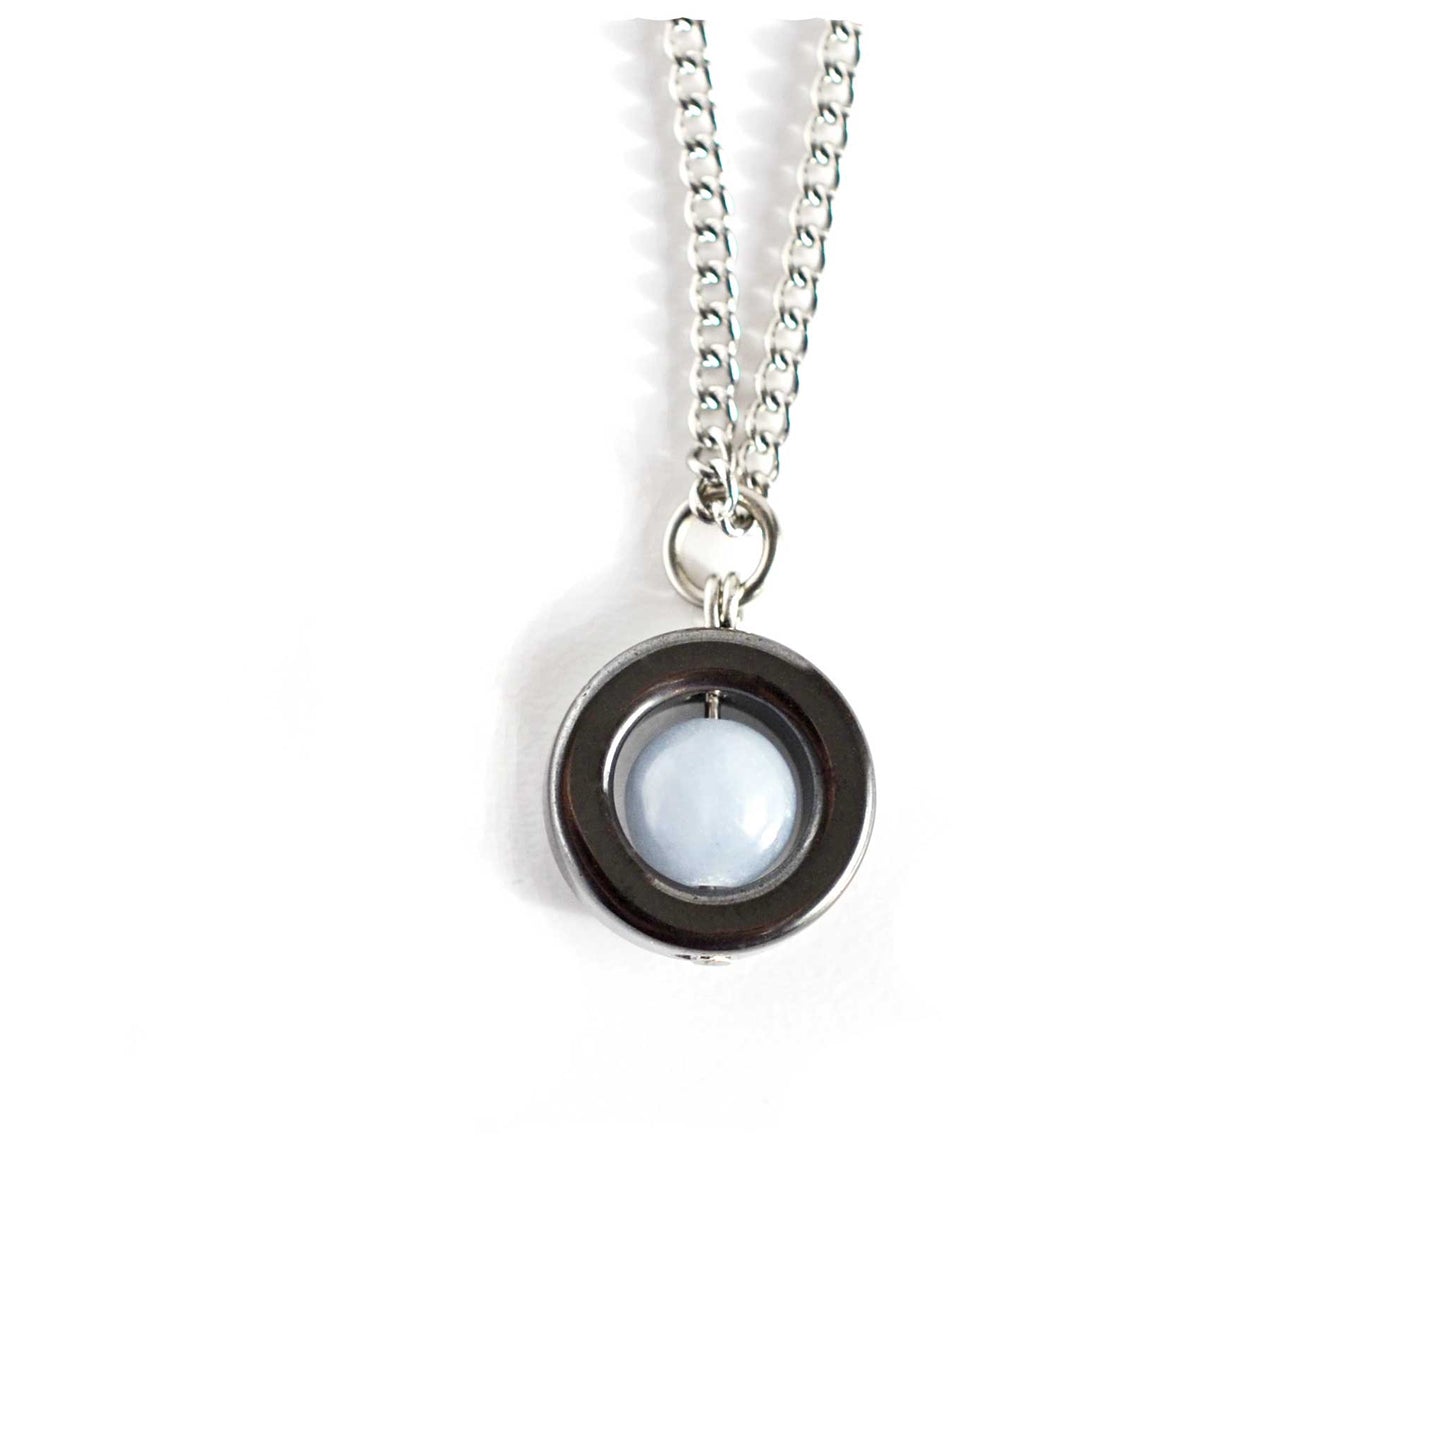 Hematite and pale blue Angelite spinner necklace on white background.